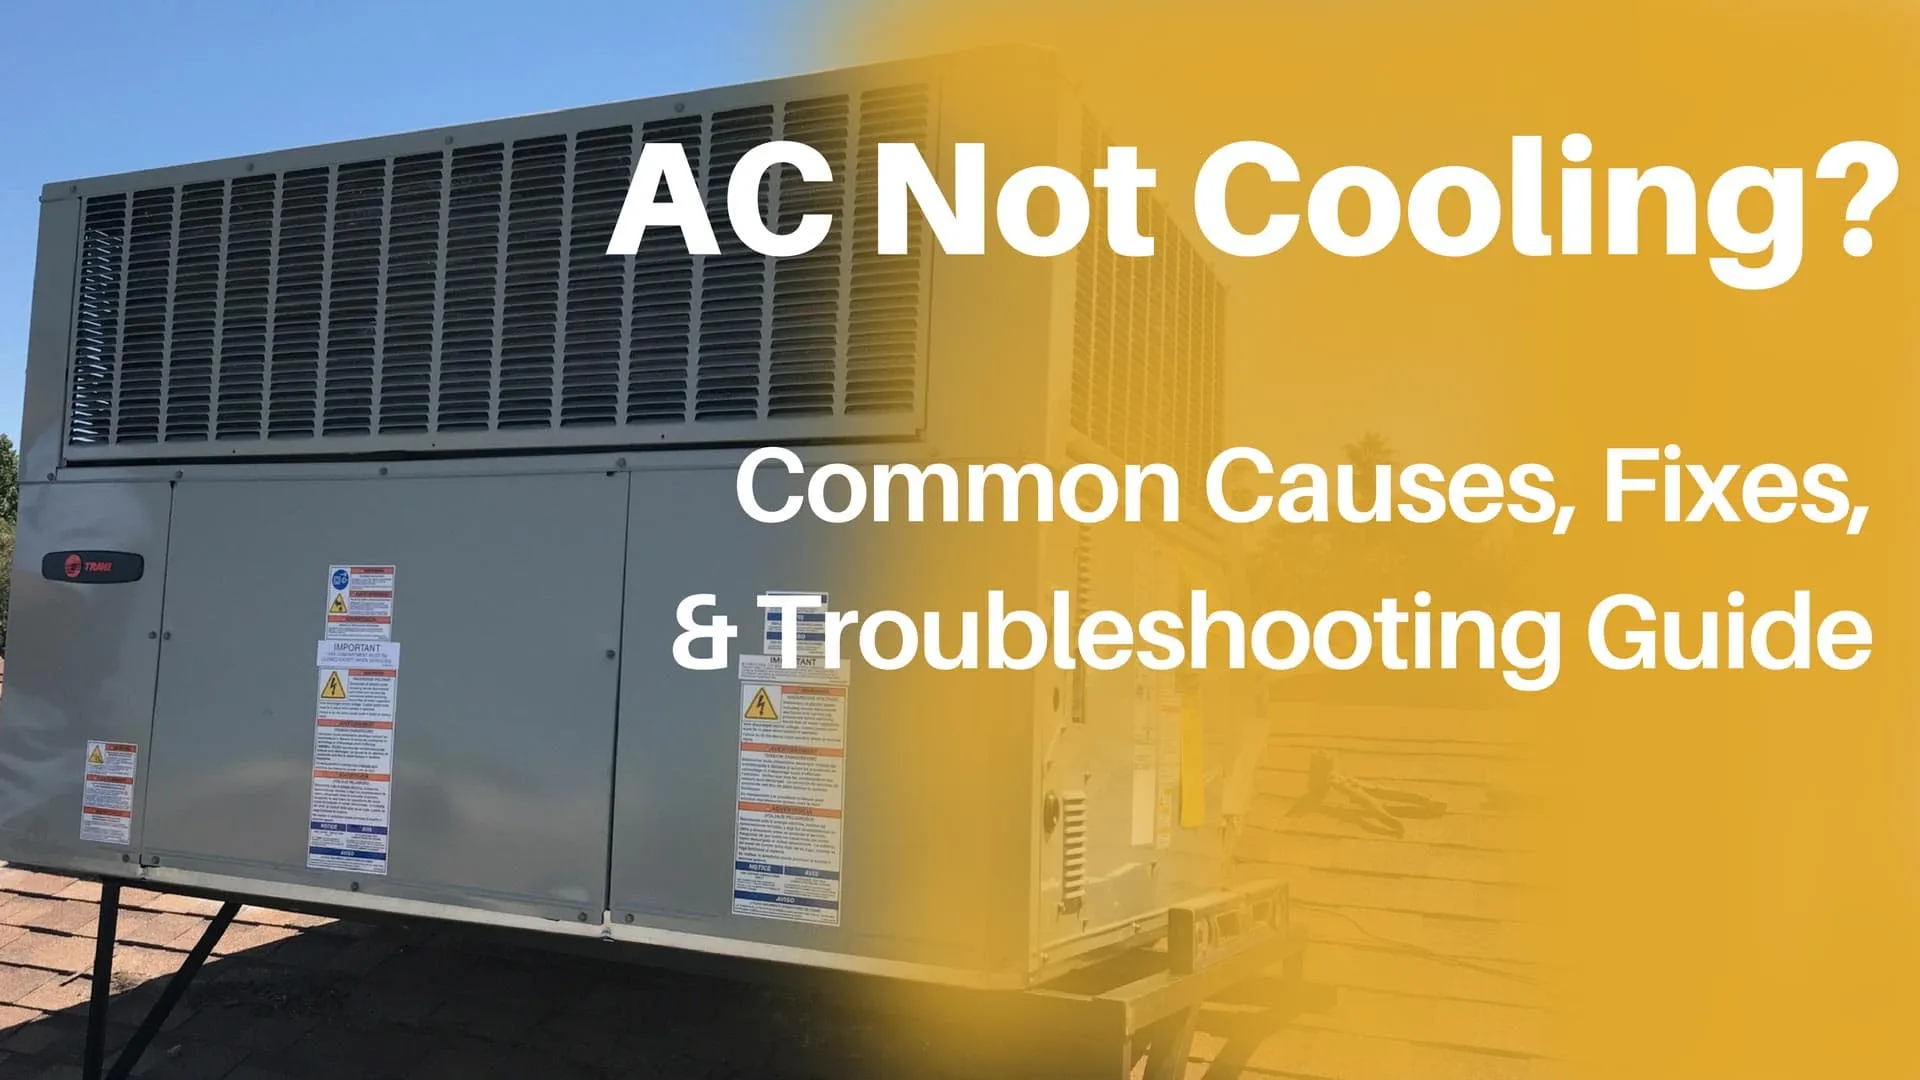 AC Not Cooling result